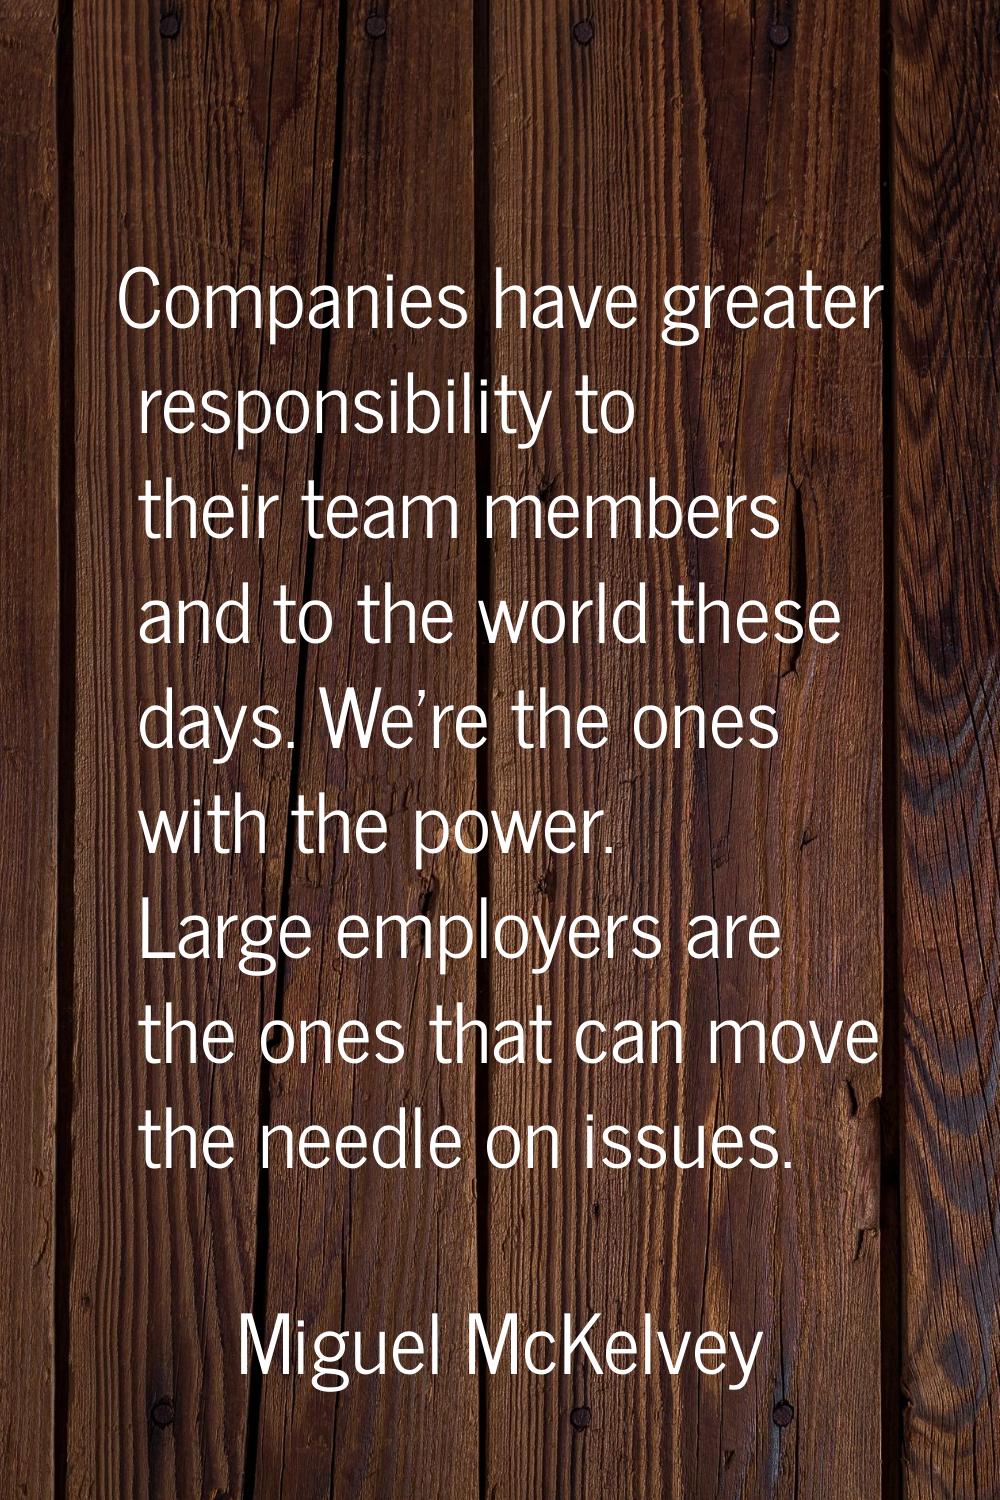 Companies have greater responsibility to their team members and to the world these days. We're the 